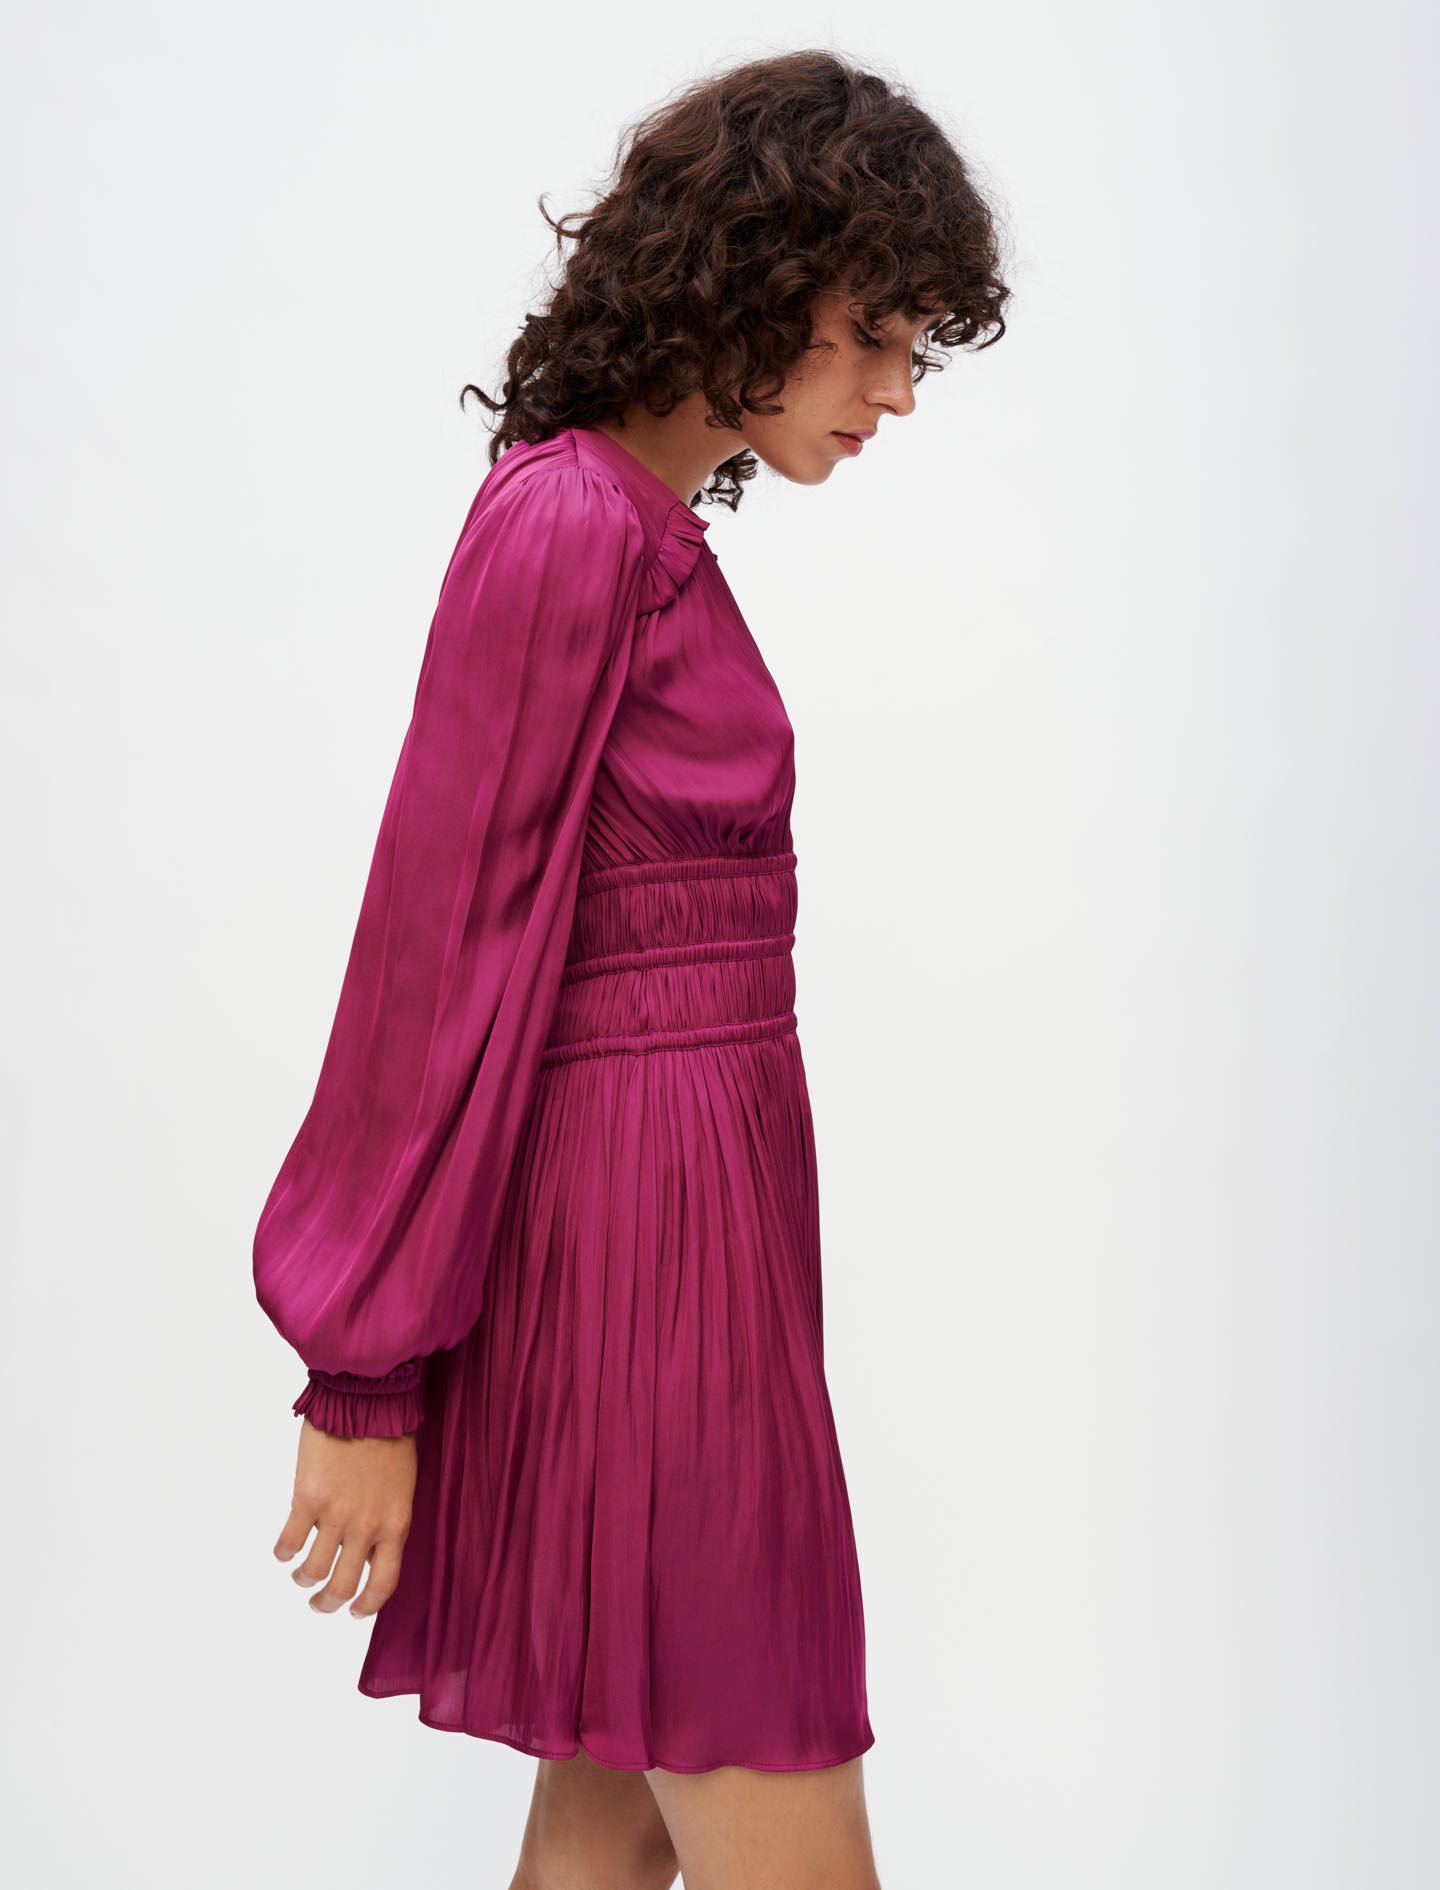 Women's Flowing Dresses - The Latest Styles | Maje